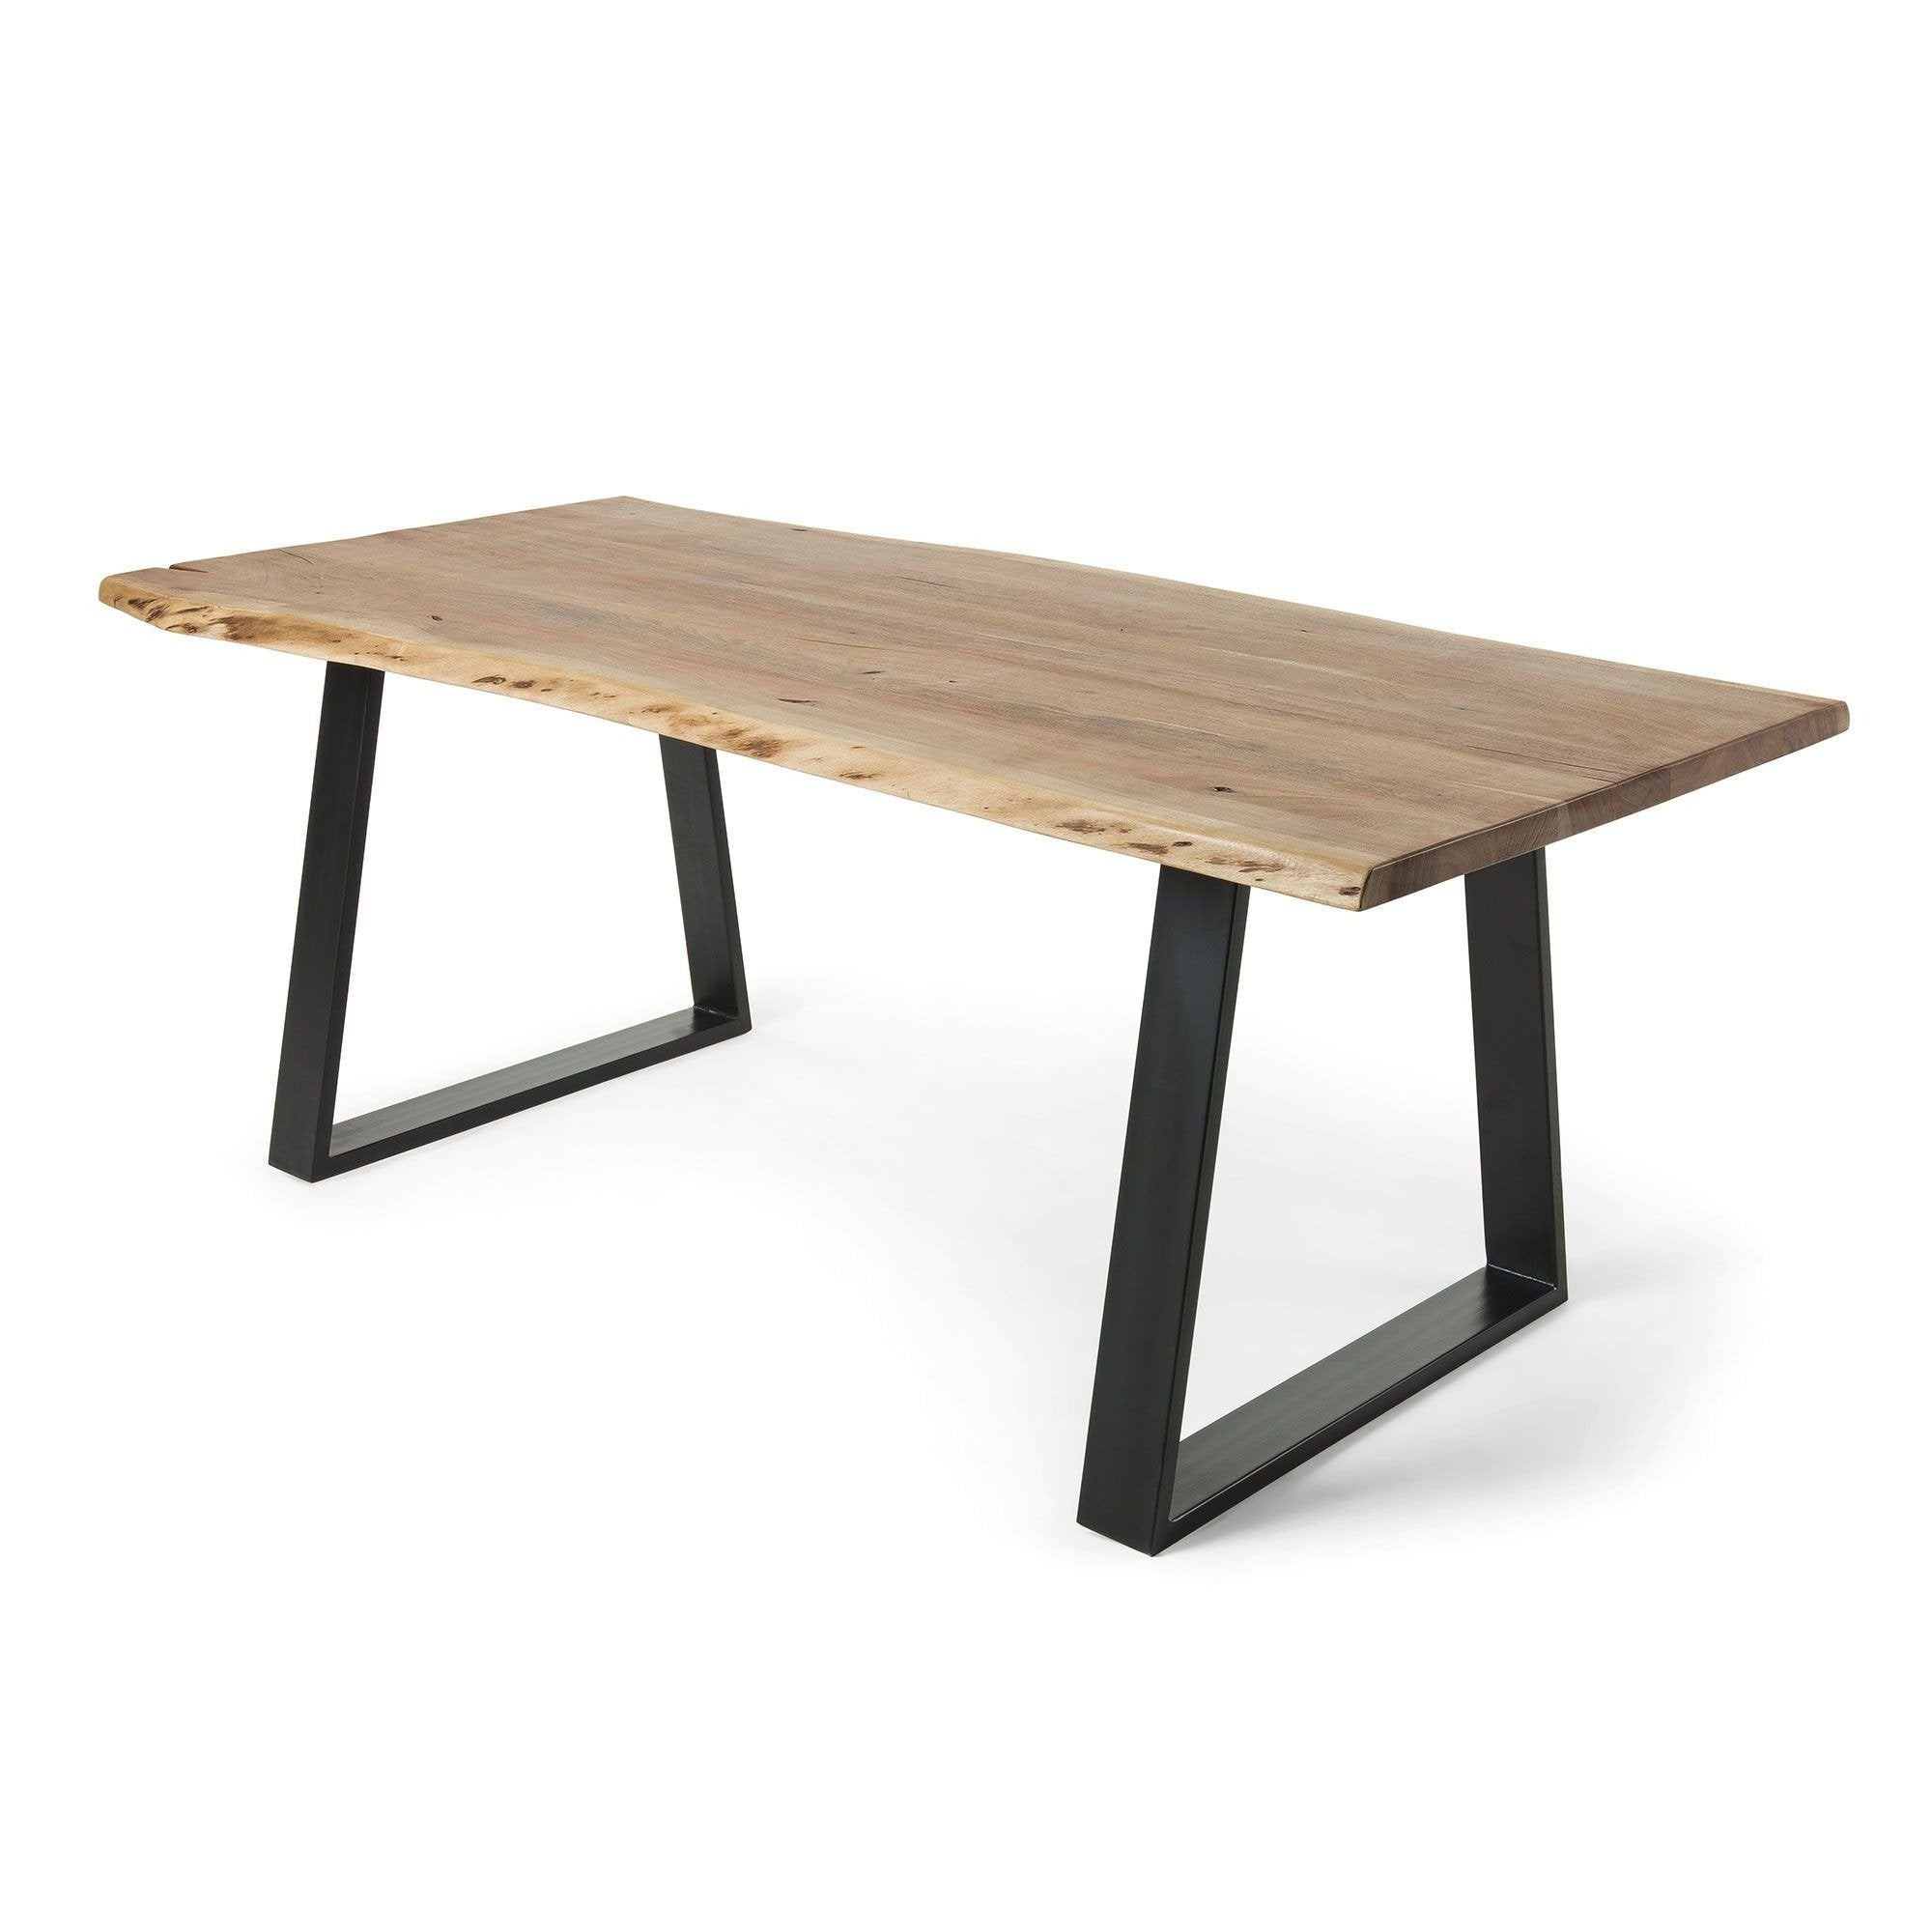 Sono Solid Wattle Timber Dining Table Natural Interior Secrets